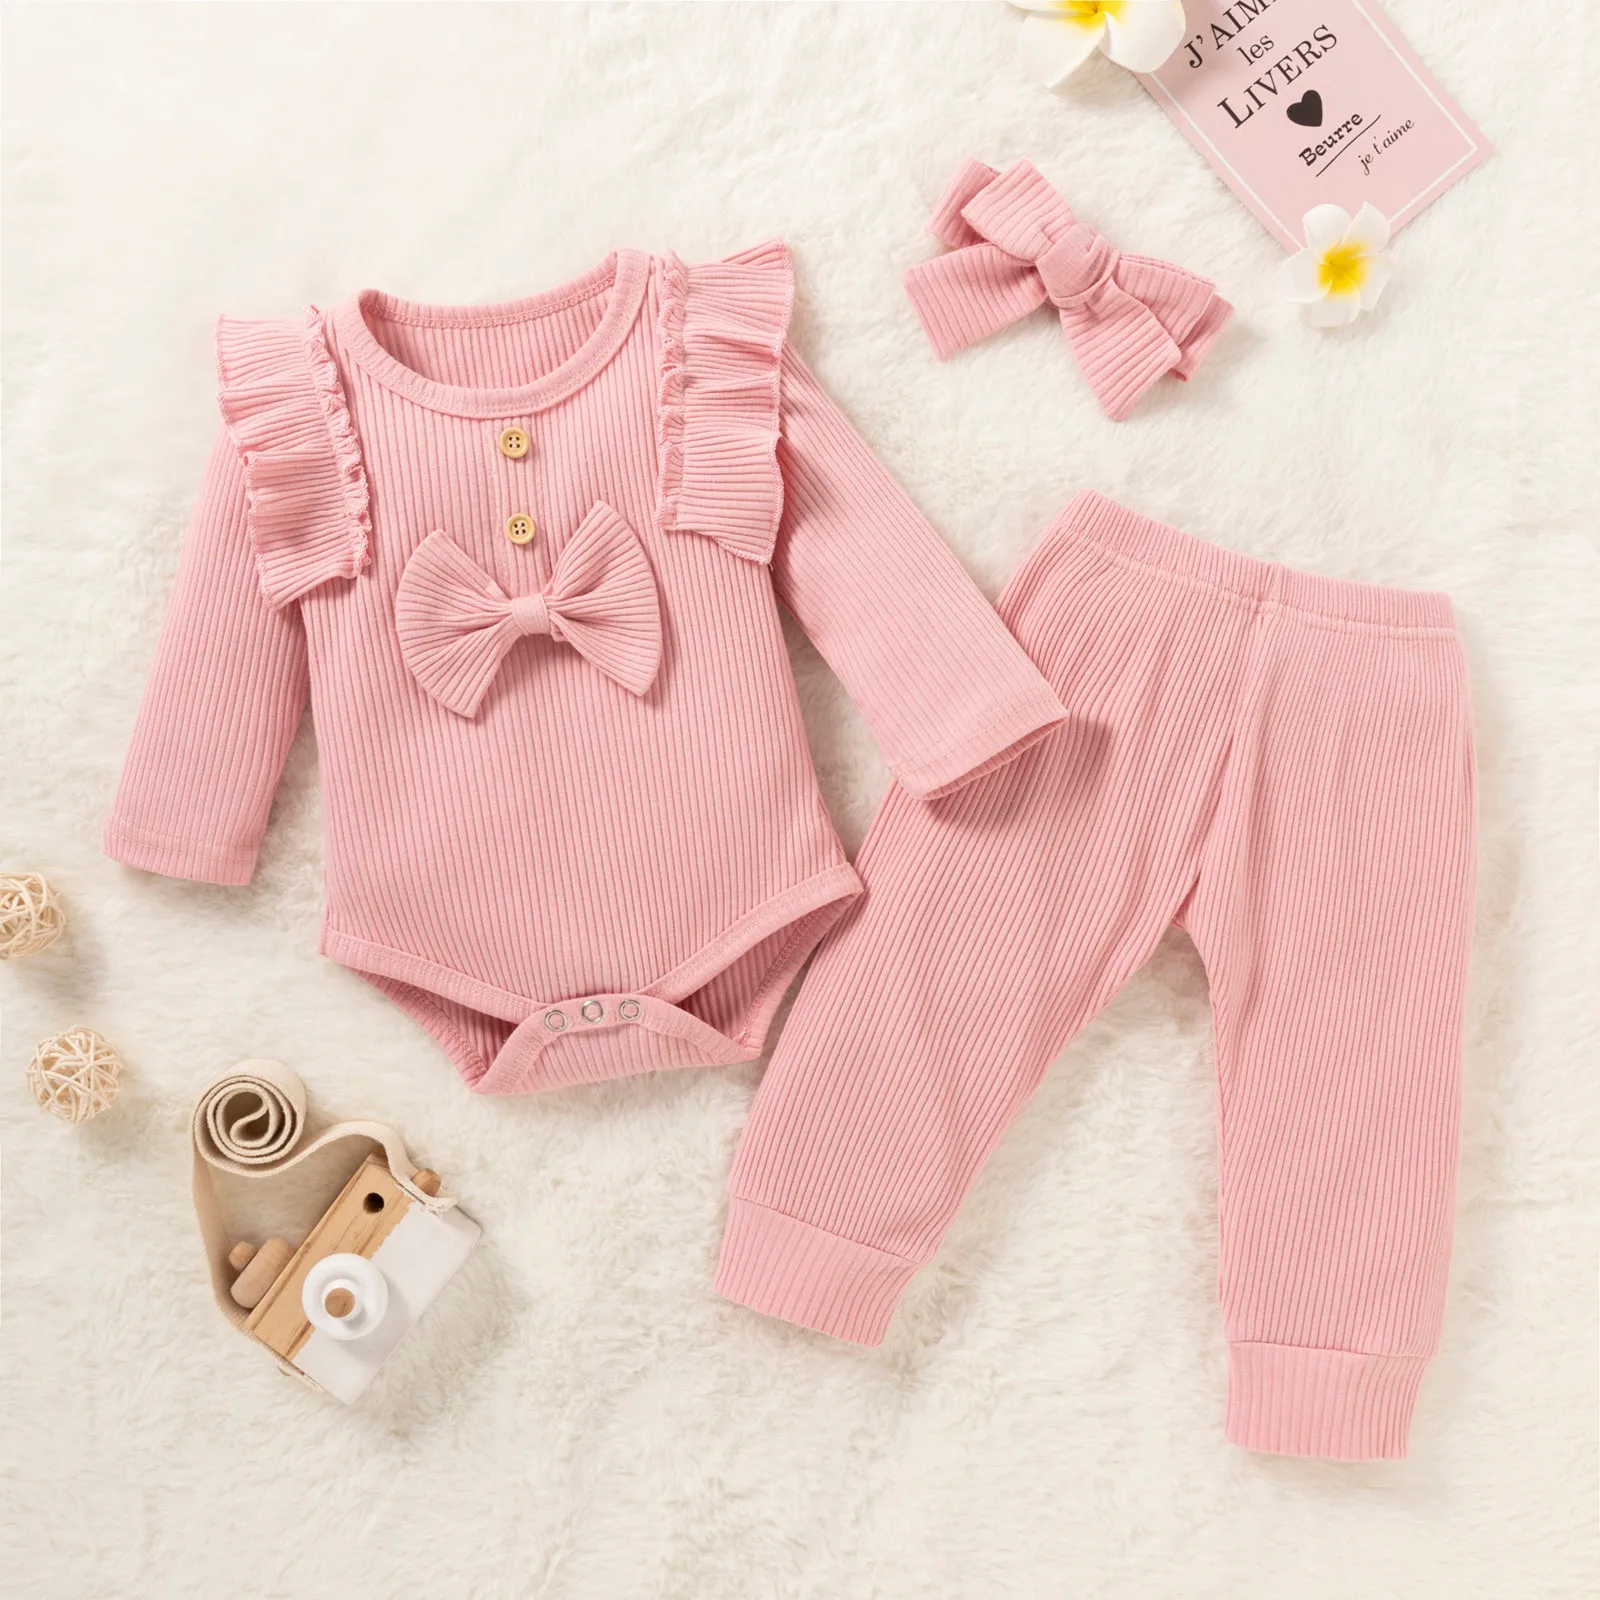 Baby Clothing Set best of sale Newborn Infant Baby Girls Solid Ruffled Ribbed Bow Romper+Pants Outfits Set Winter Warm Toddler Baby Girls Smooth Velvet Outfits baby girl cotton clothing set